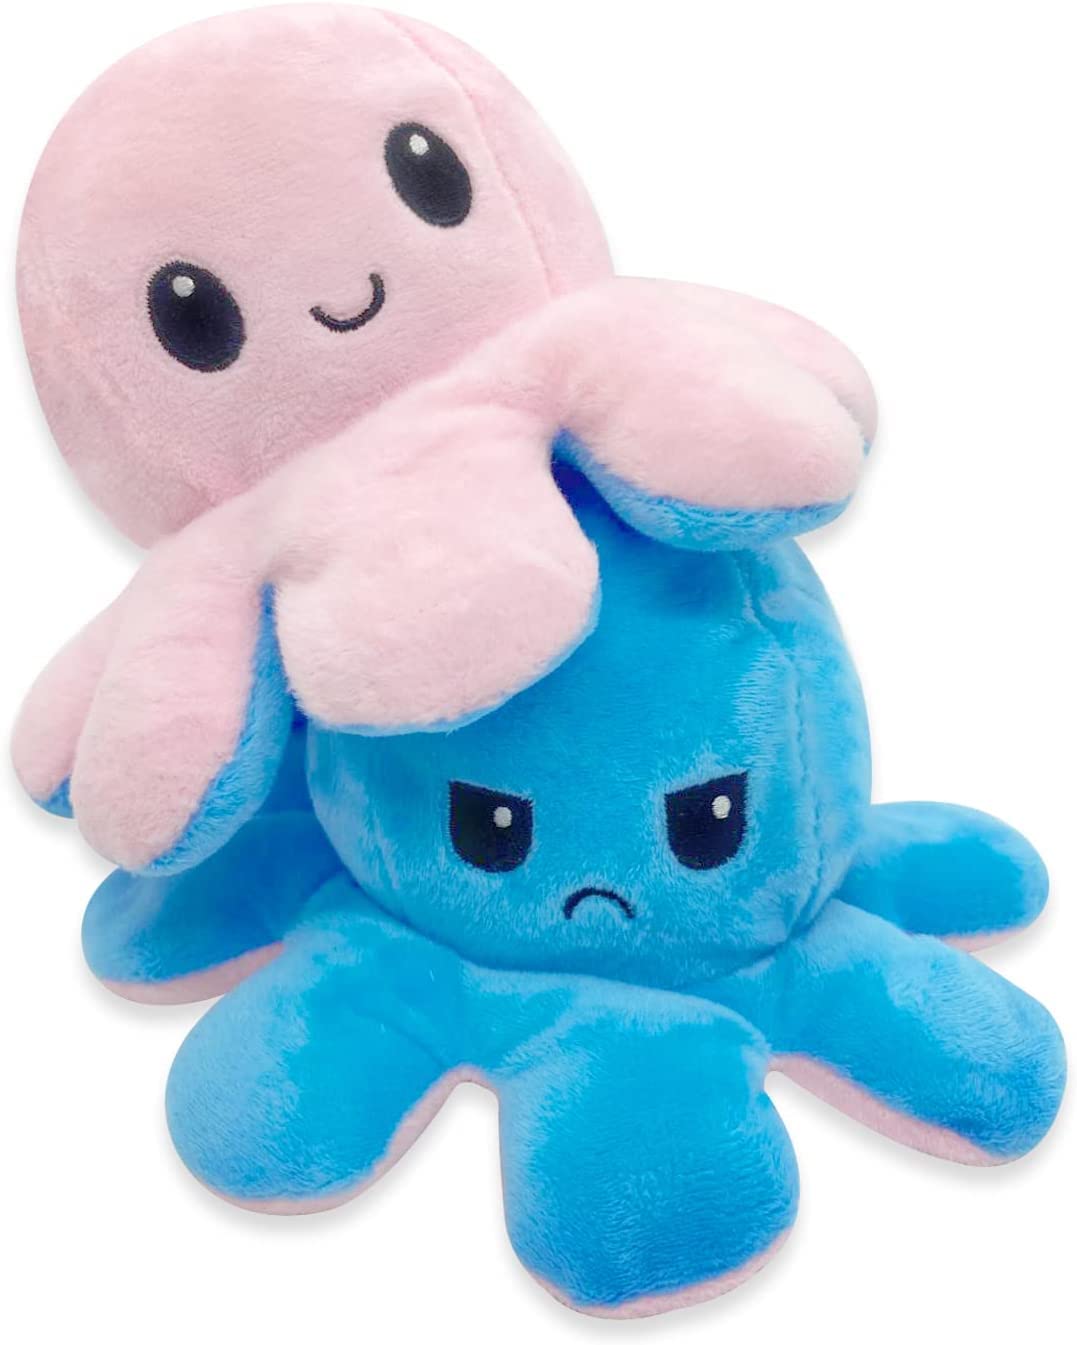 FASTEXX Reversible Octopus Plush Toy, Express Your Mood with Happy Face and Sad Face Mood Octopus, Soft Stuff Flip Octopus Plushie, for Kids, Friends, Family (Blue/Pink)